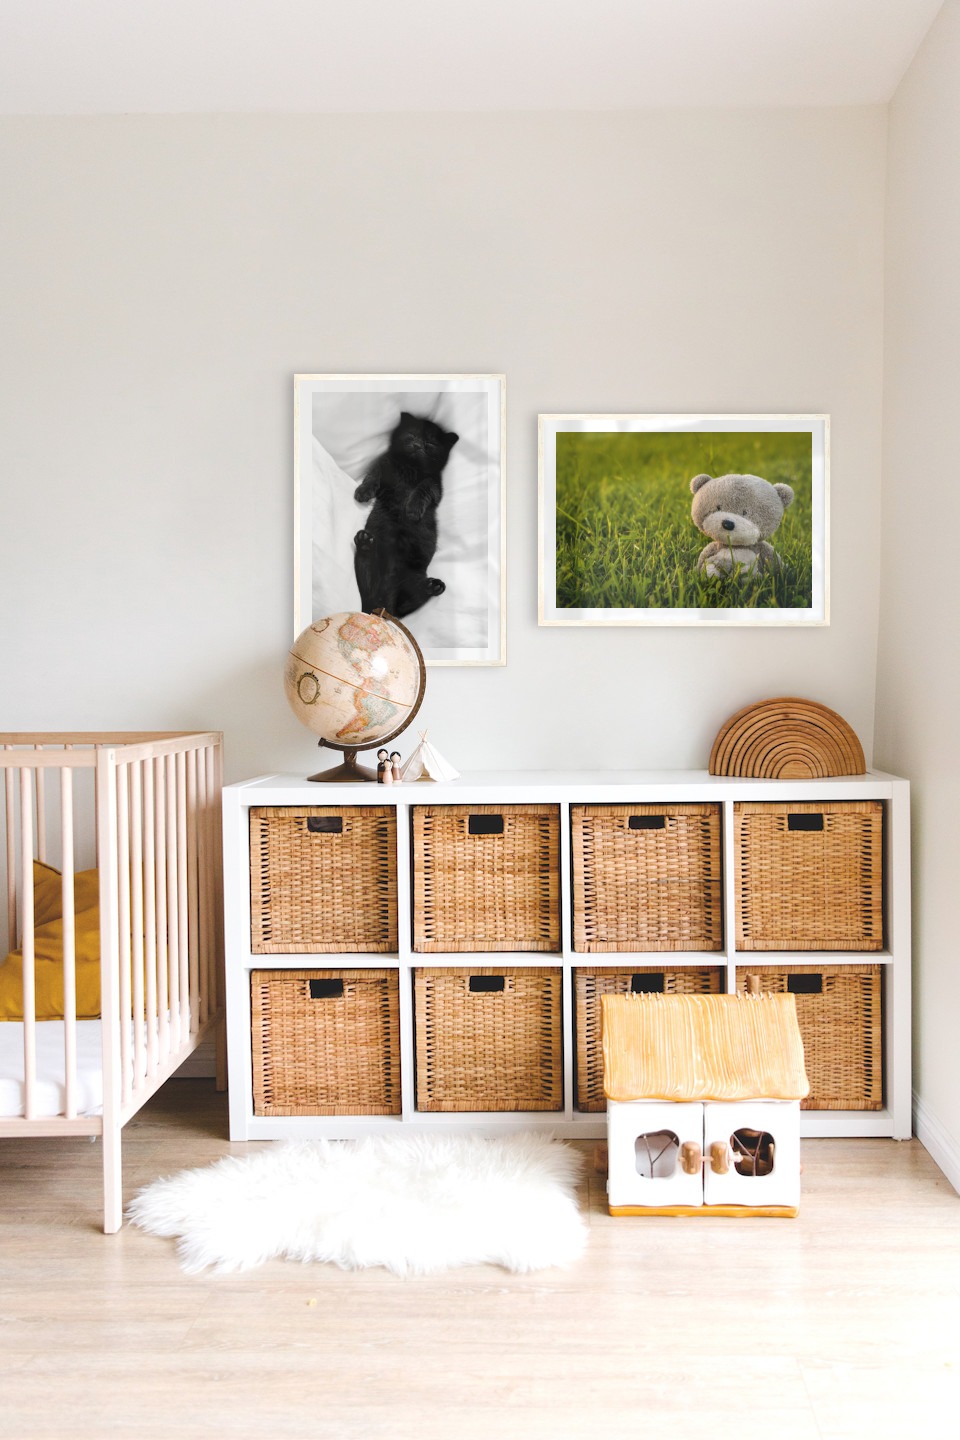 Gallery wall with picture frames in light wood in sizes 50x70 with prints "Cat in bed" and "Teddy bear in a field"